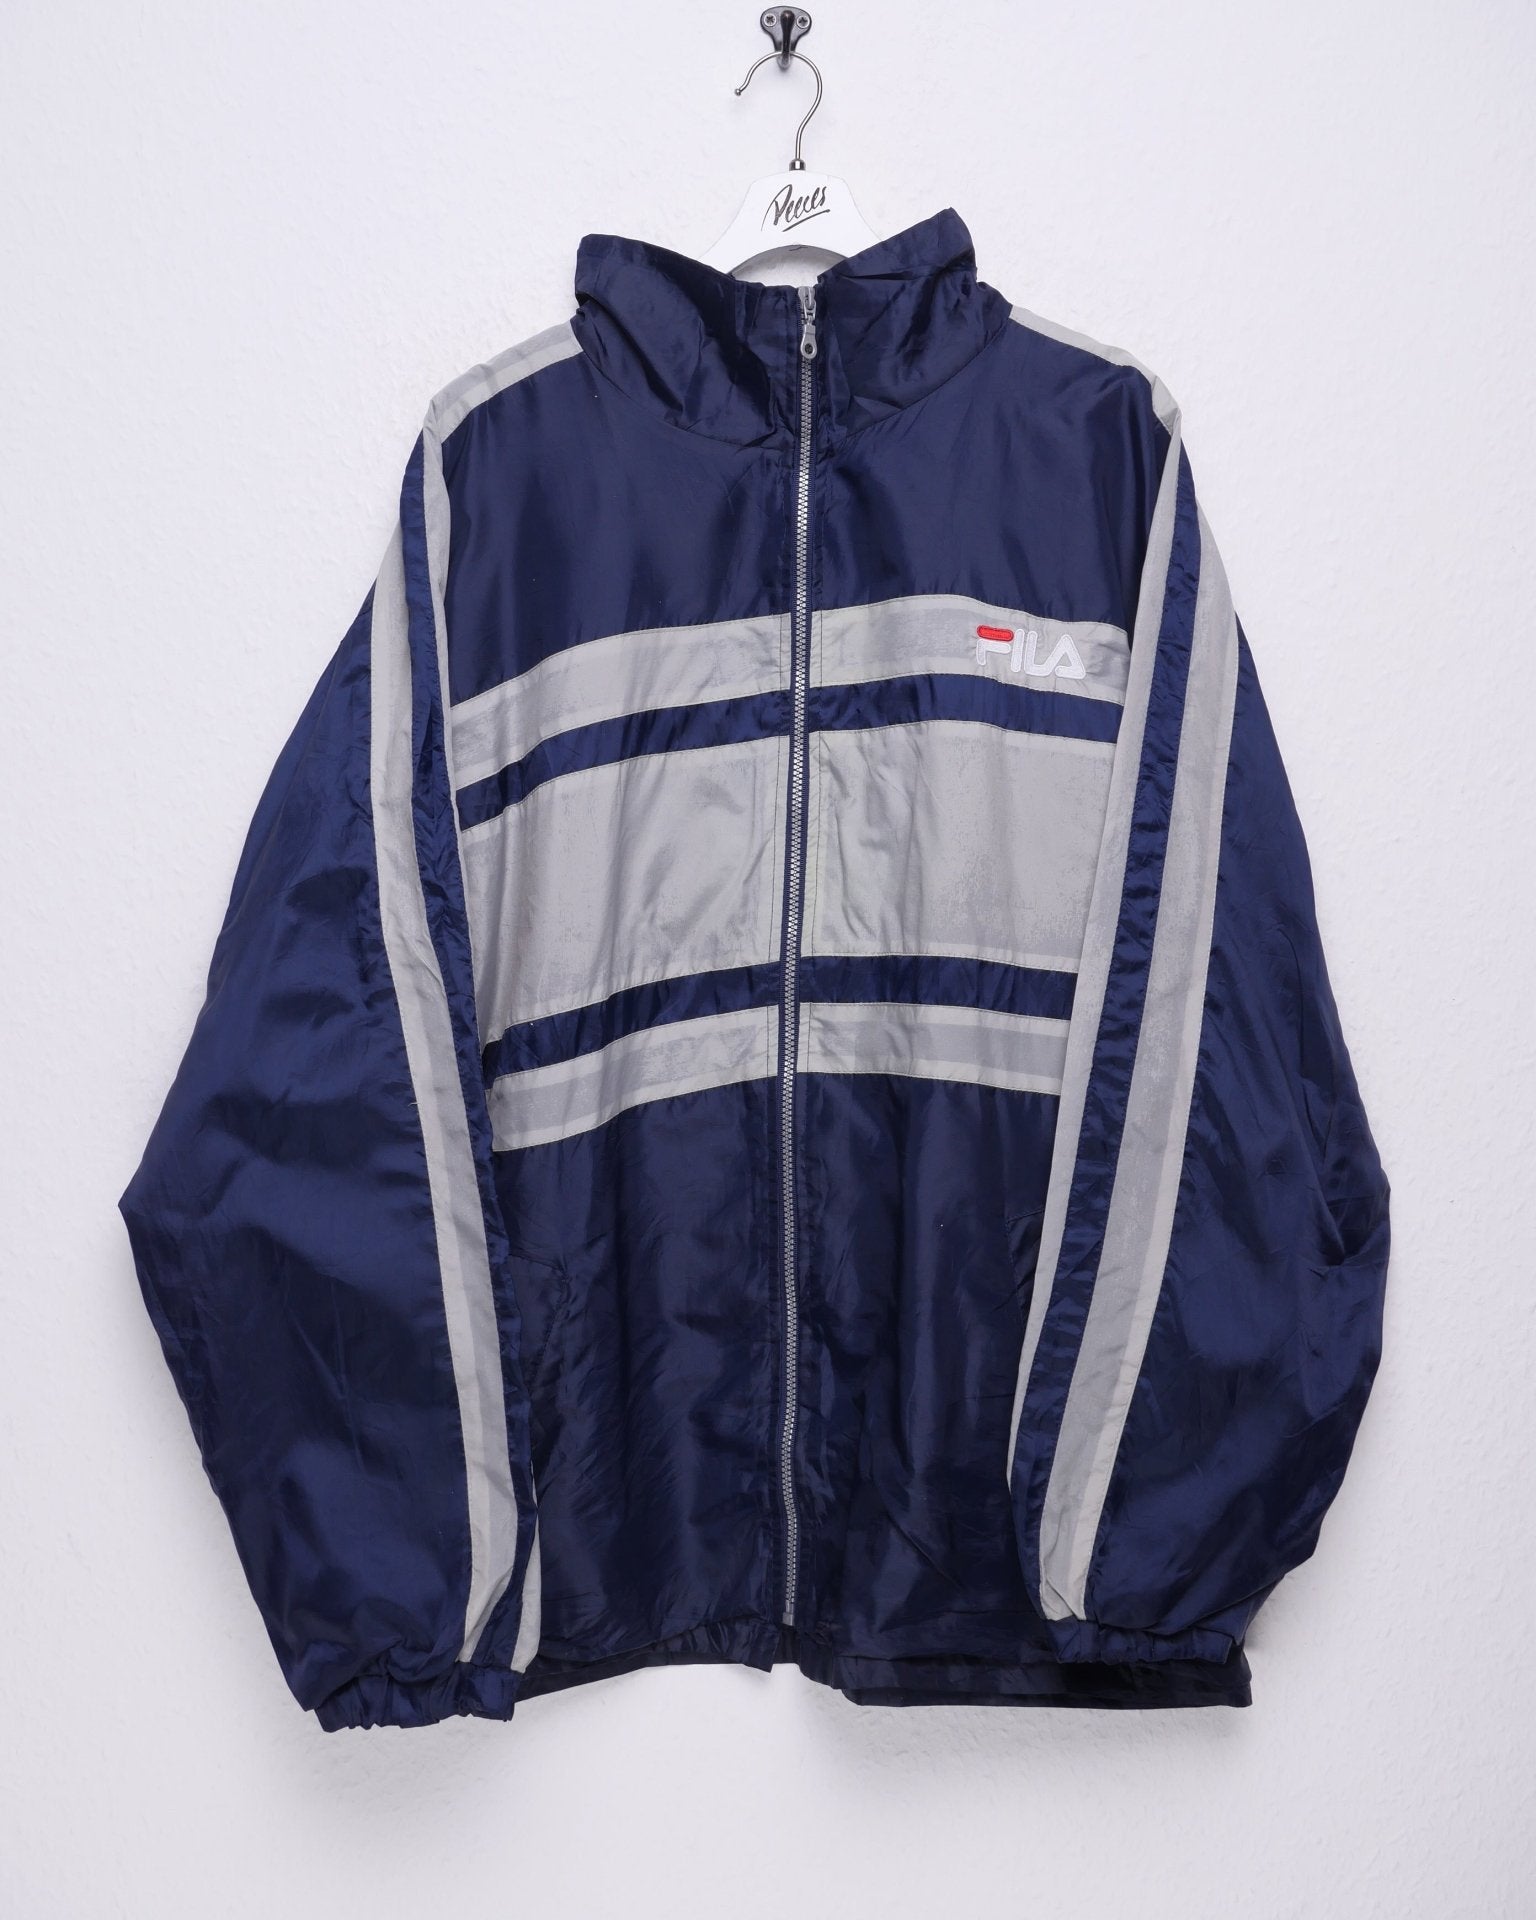 Fila embroidered Spellout Vintage Track Jacke - Peeces